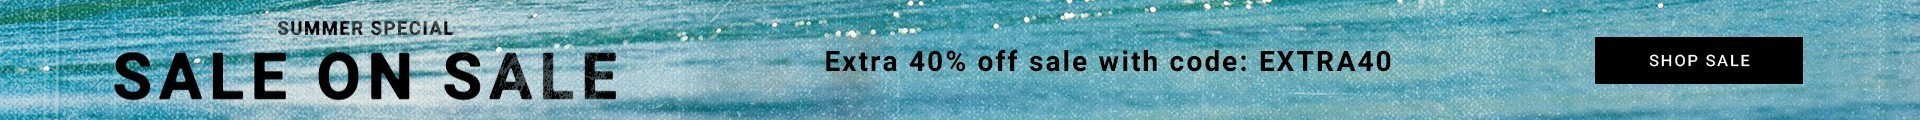 Mens extra 40% off sale